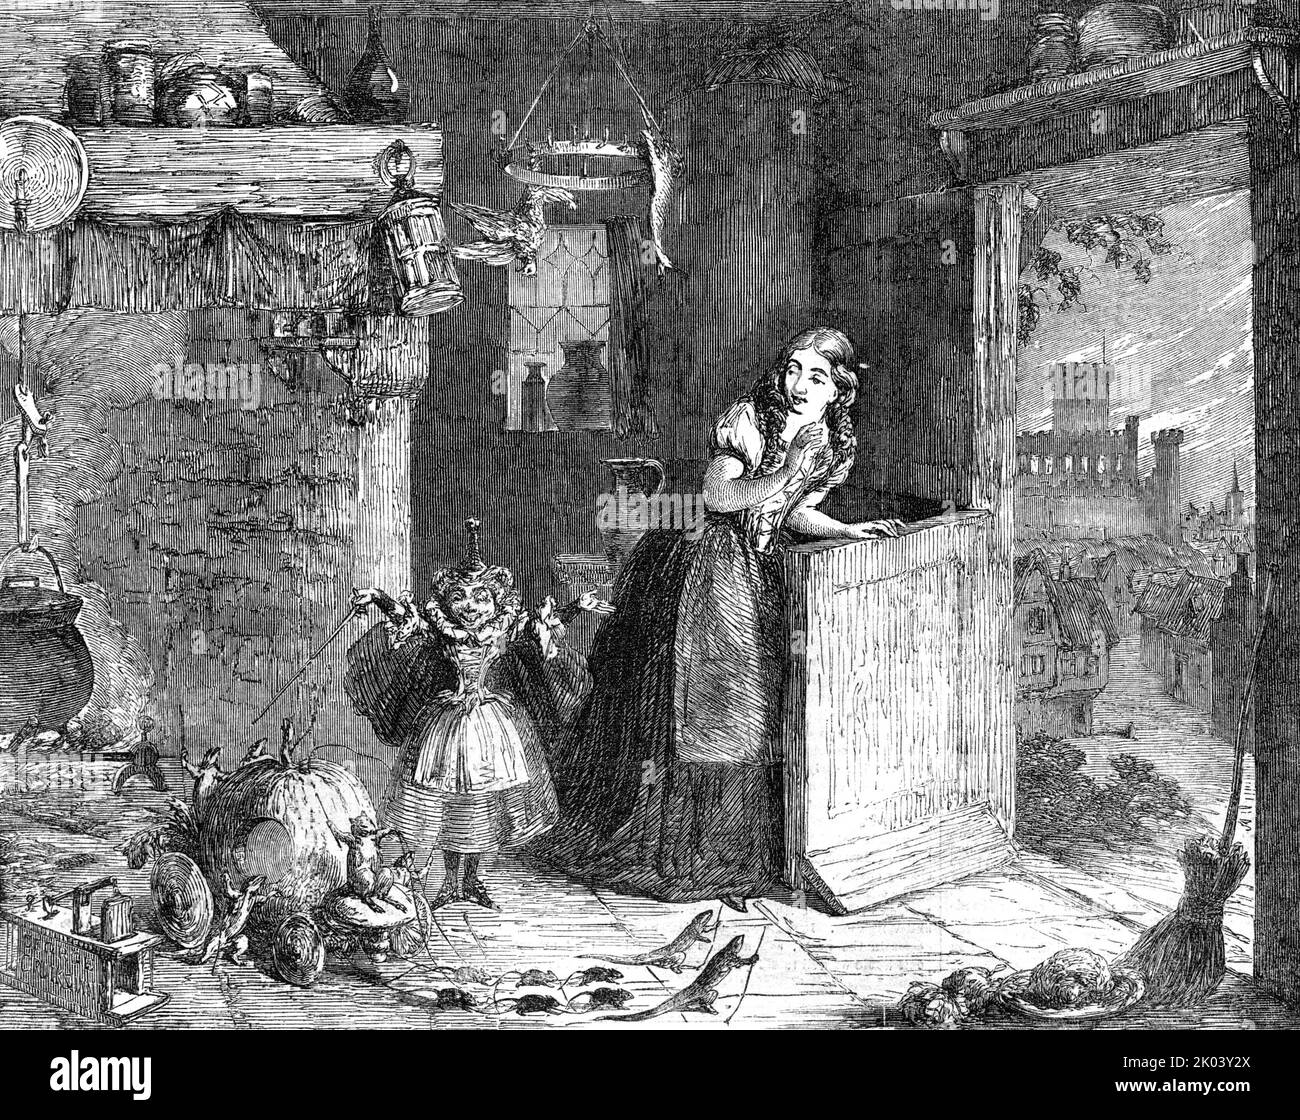 &quot;Cinderella&quot; - painted by George Cruikshank - from the Exhibitionn of the Royal Academy, 1854. 'The admirers of Mr Cruikshank - and he has many, and none warmer than ourselves, have been pleased to see of late that, he has chosen to dwell in fairy land - that he prefers Queen Mab and Cinderella, to Bond-street dandies and the follies of the day. It would be difficult indeed to find a fitter artist to introduce to the Fairy Queen: he really seems to revel in tiny circles, and on mushroom tops, with a Puck-like vivacity and good-will. We engrave a recent instance of his  skill in embod Stock Photo